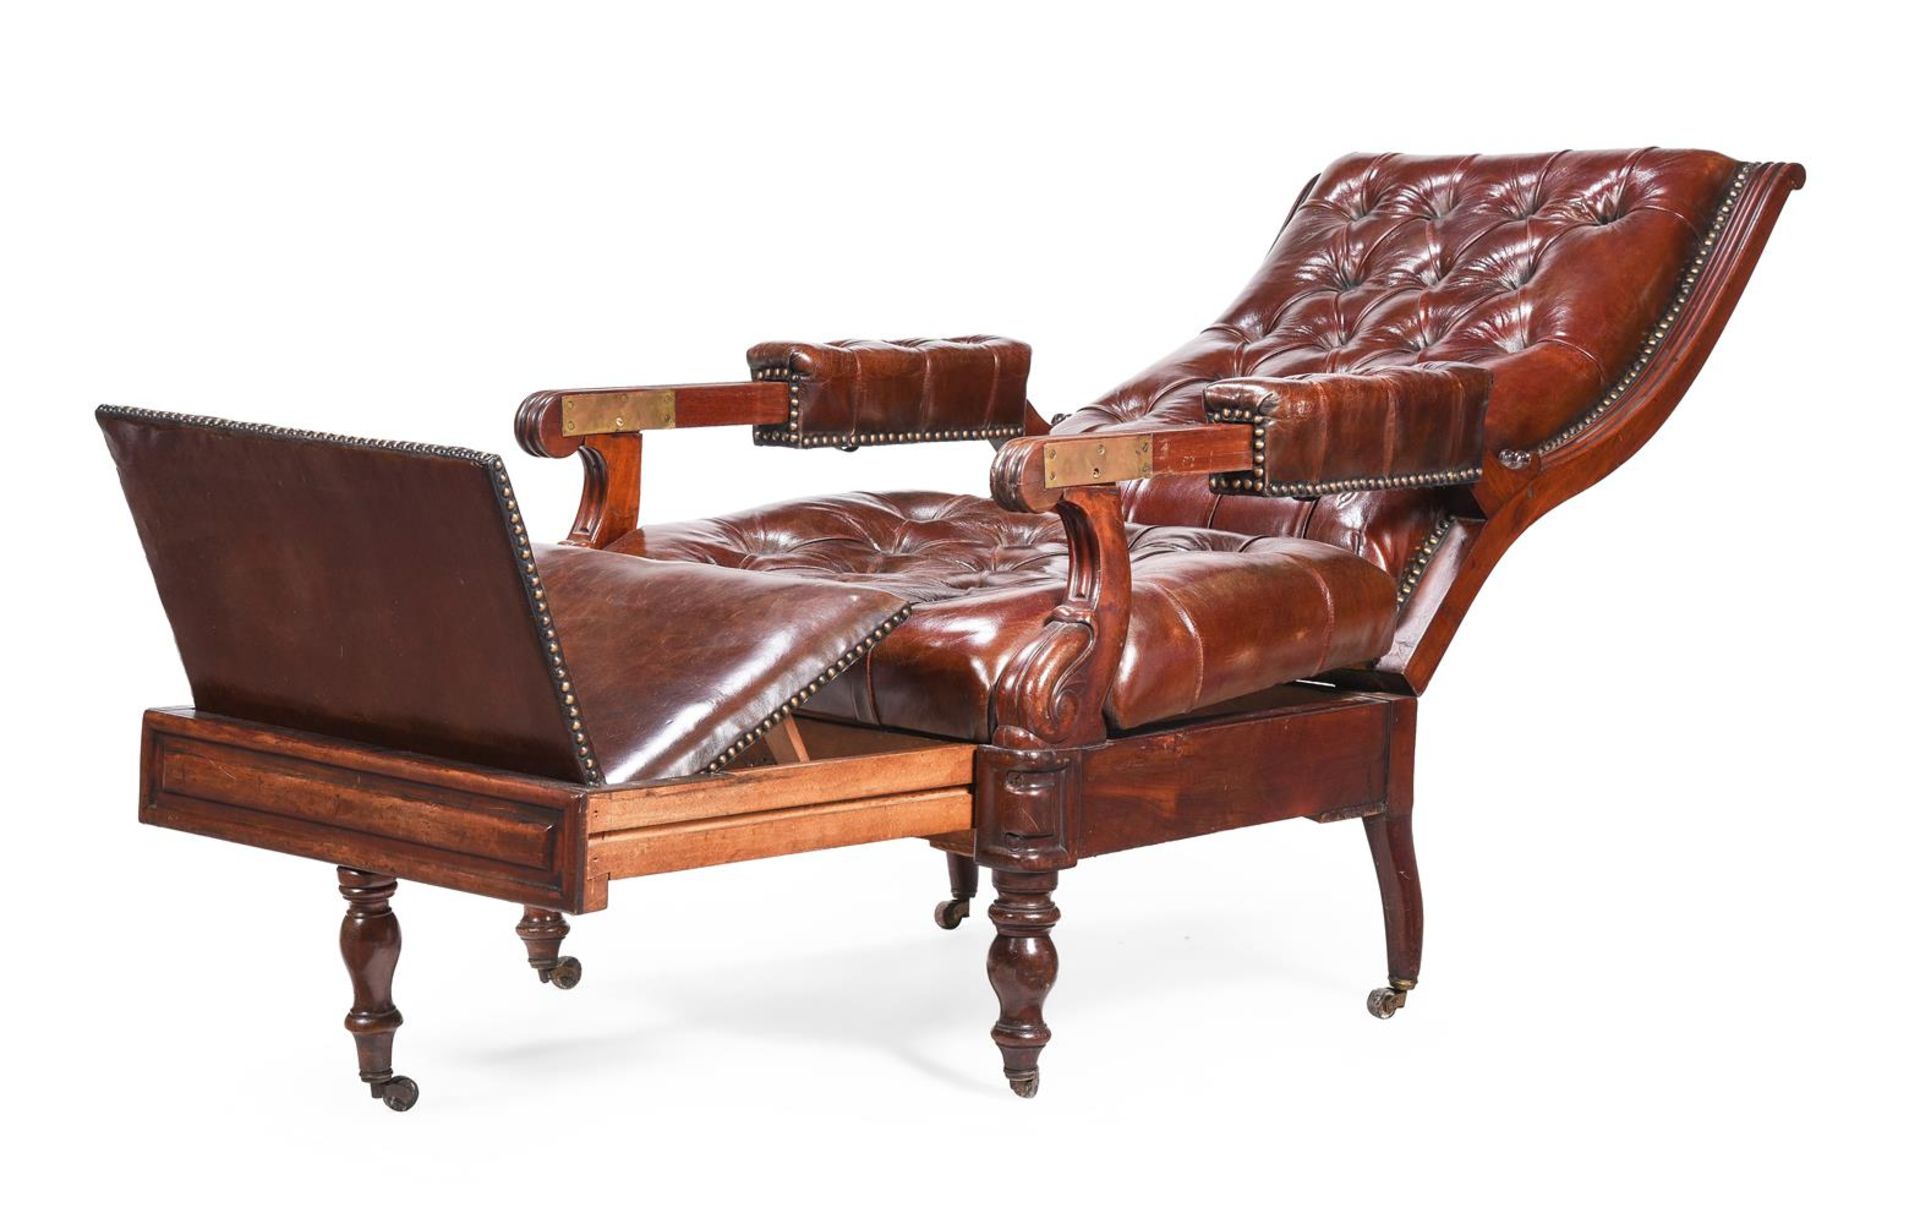 A WILLIAM IV MAHOGANY 'DAWS PATENT' RECLINING LEATHER ARMCHAIR - Image 2 of 6